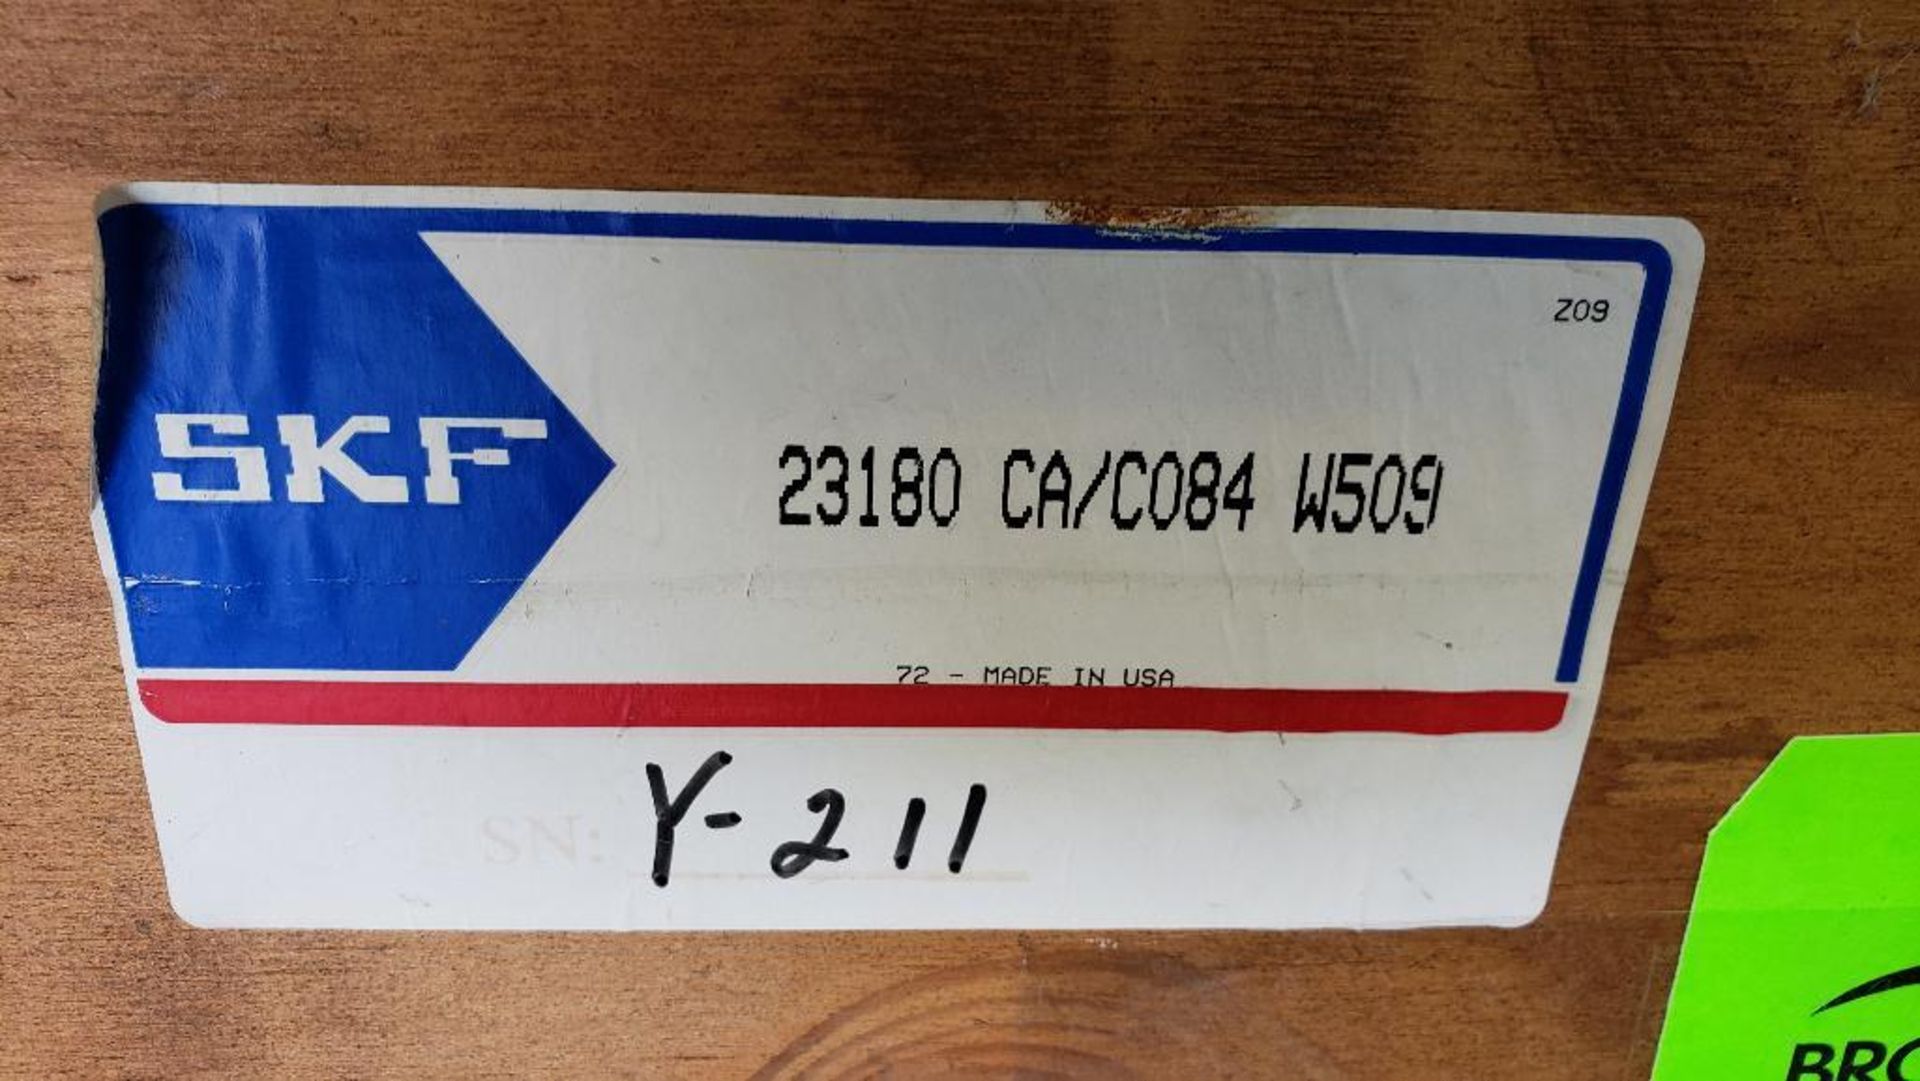 SKF super precision large capacity bearing. Part number 23180 CA/C084-W509. New in crate. - Image 2 of 6